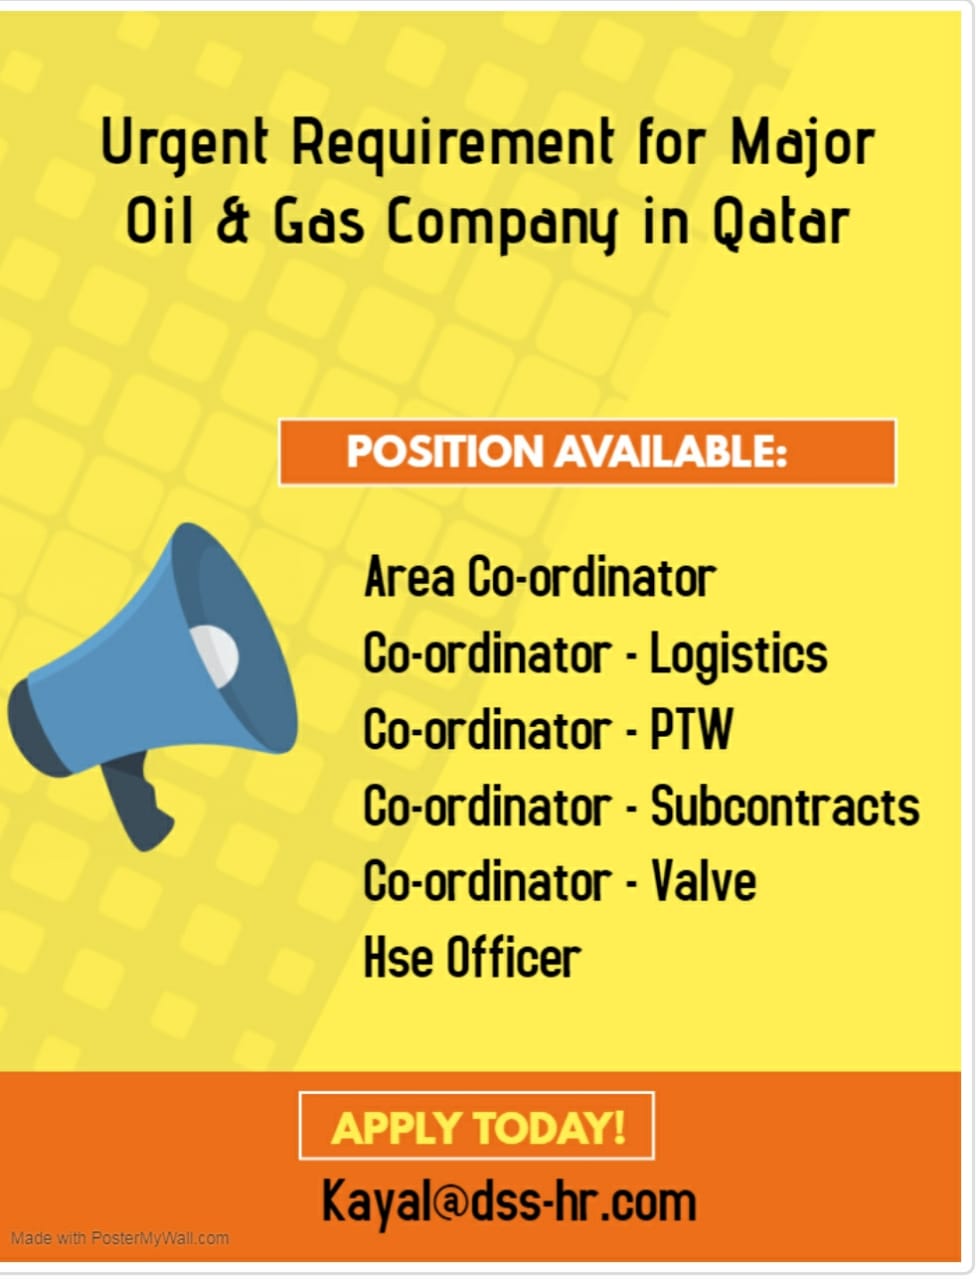 URGENT REQUIREMENT FOR MAJOR OIL & GAS COMPANY